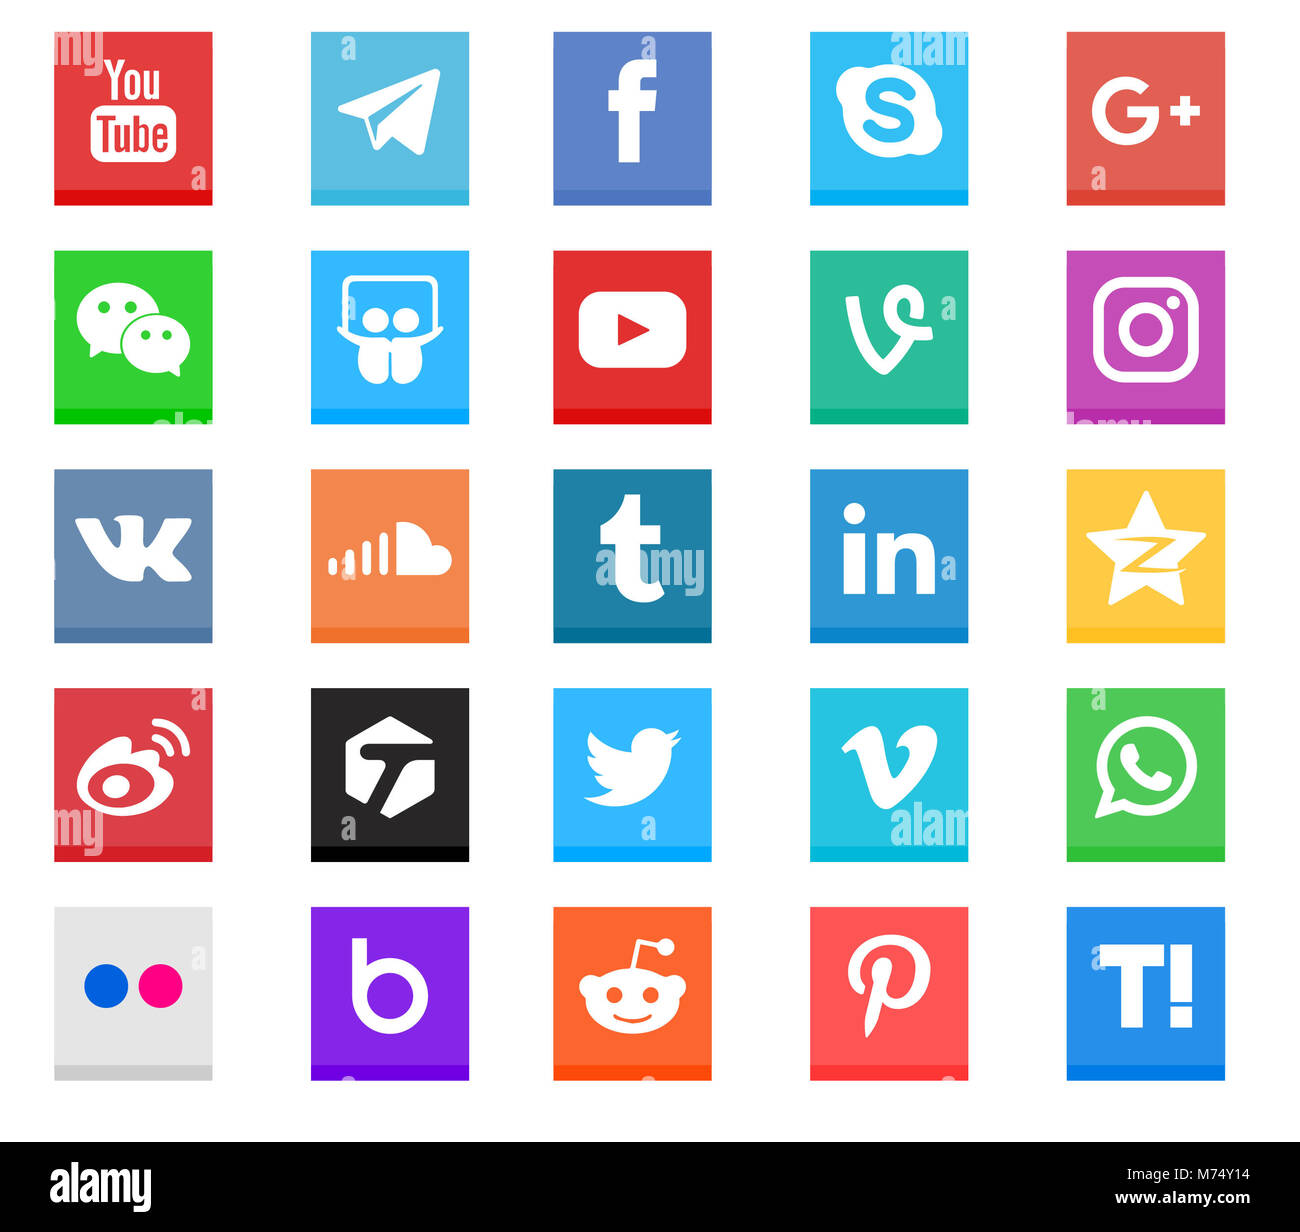 Social media icon collection with different types of web button icon set Stock Photo